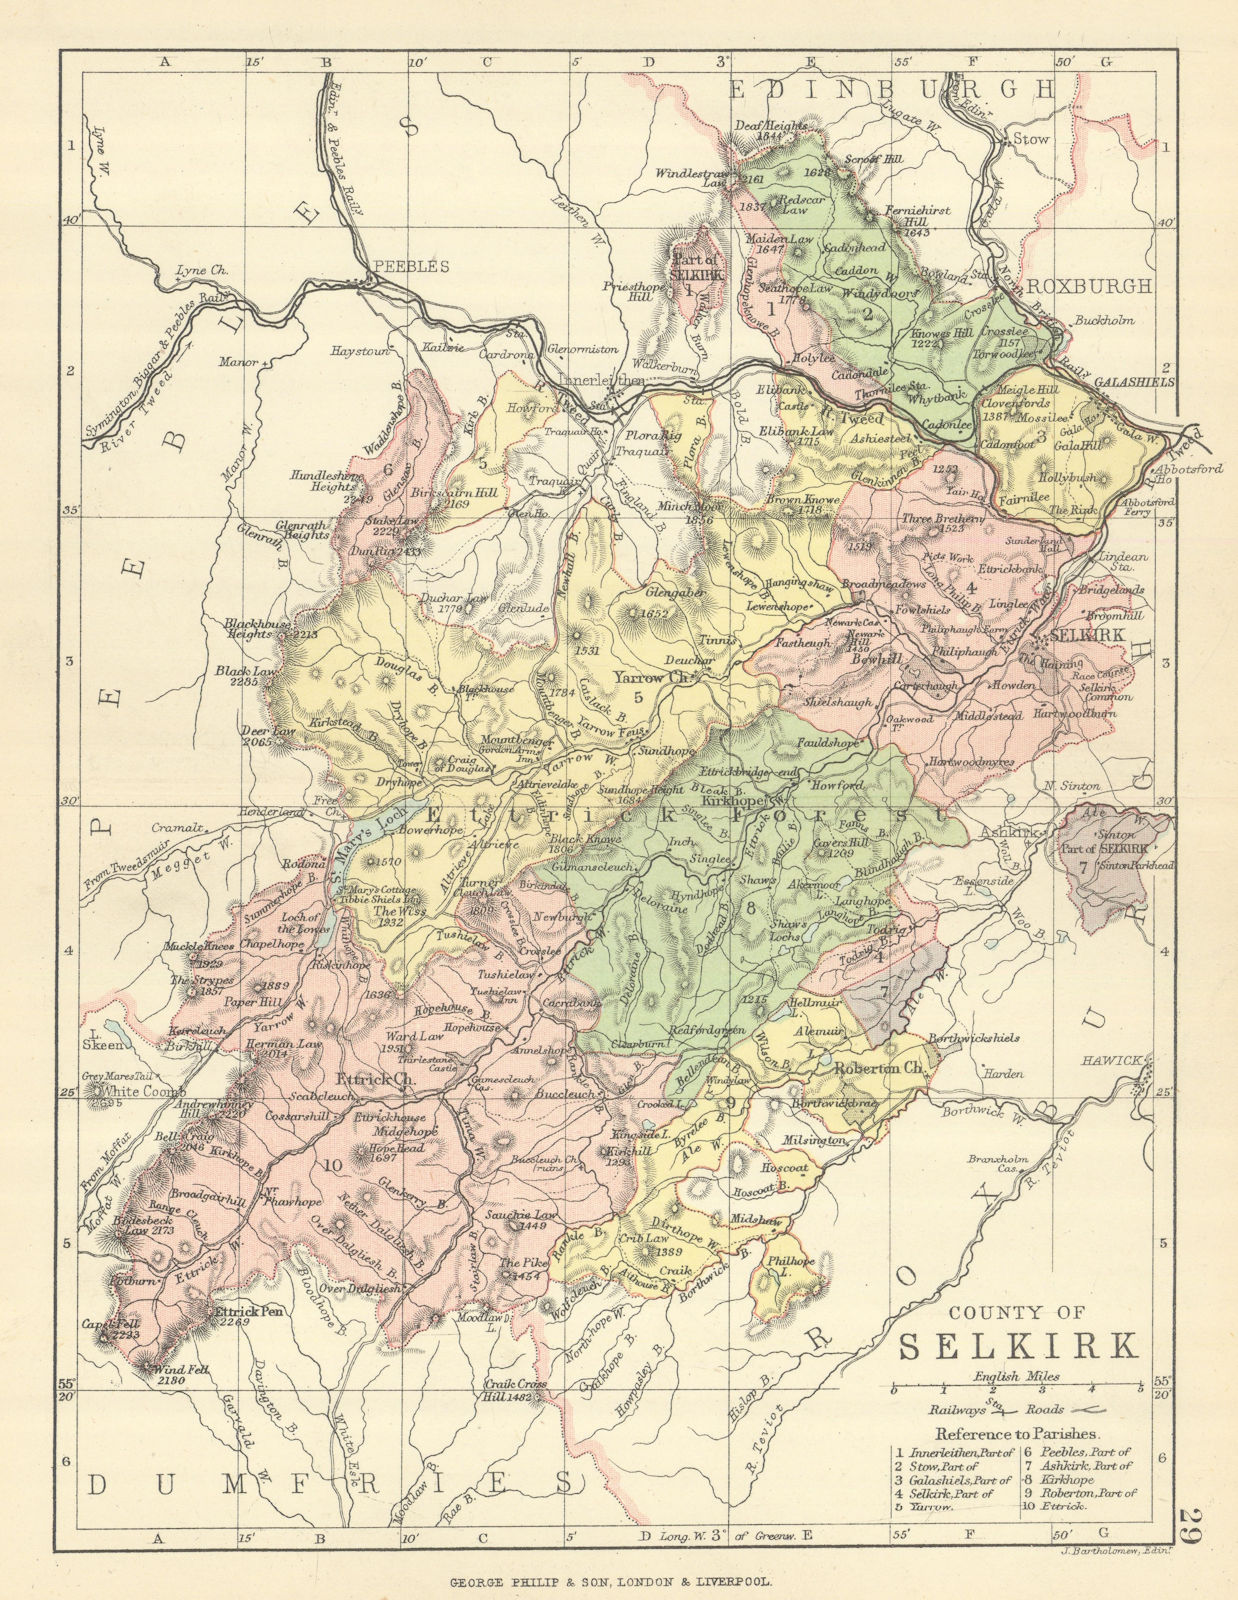 Associate Product 'County of Selkirk'. Selkirkshire. Parishes. BARTHOLOMEW 1886 old antique map